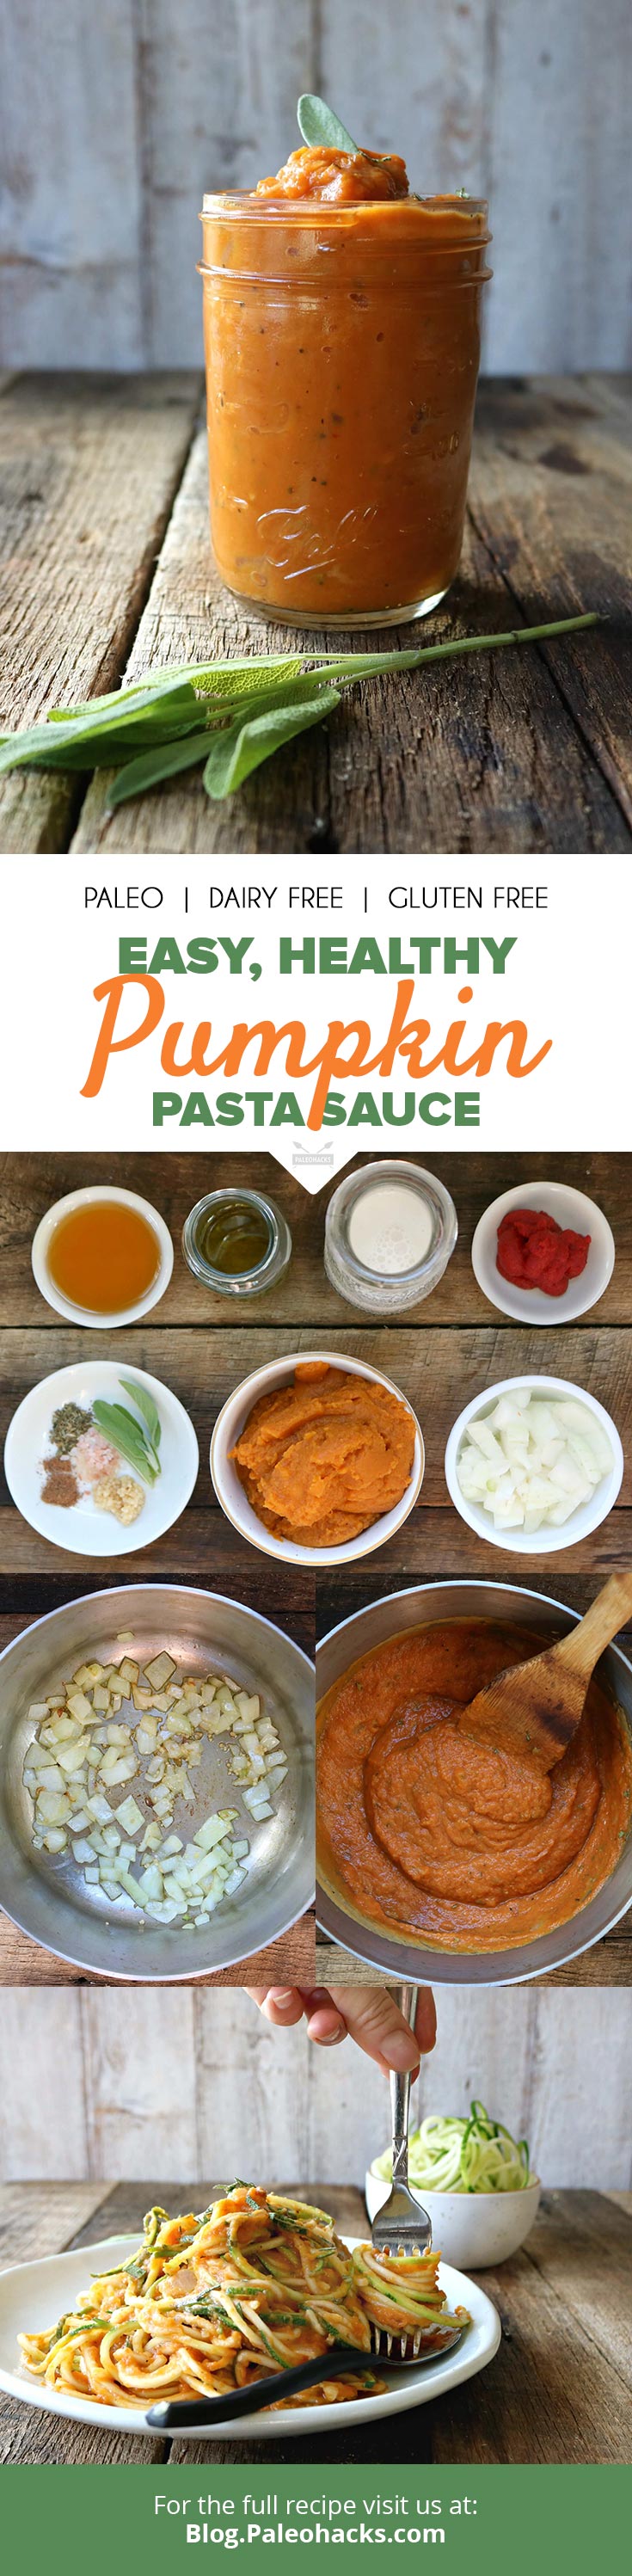 Smother this creamy pumpkin pasta sauce over zucchini noodles for an autumn-inspired meal.